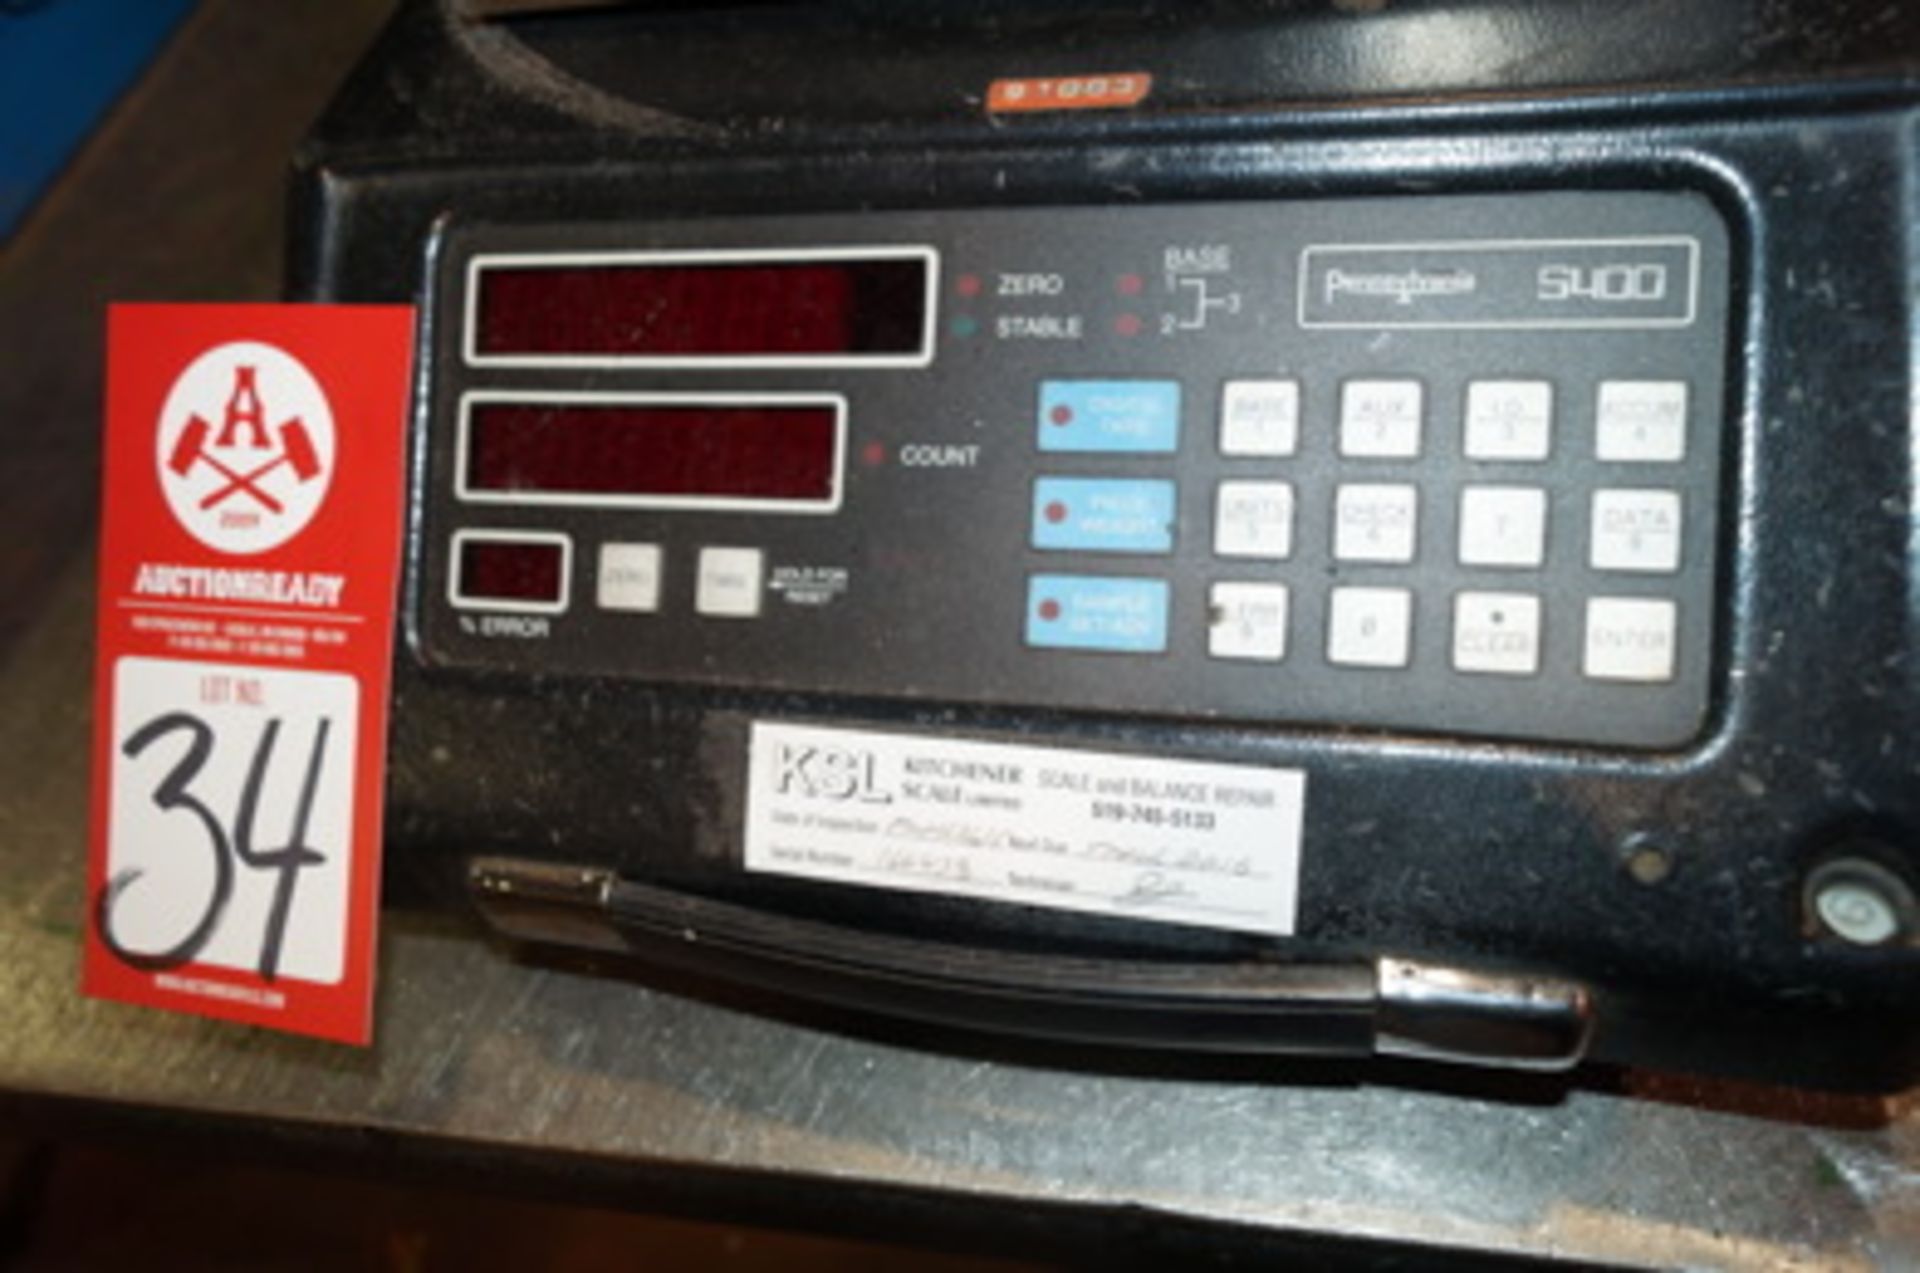 Pennslyvania S400 Table Scale w/ Digital Read out - Image 2 of 2